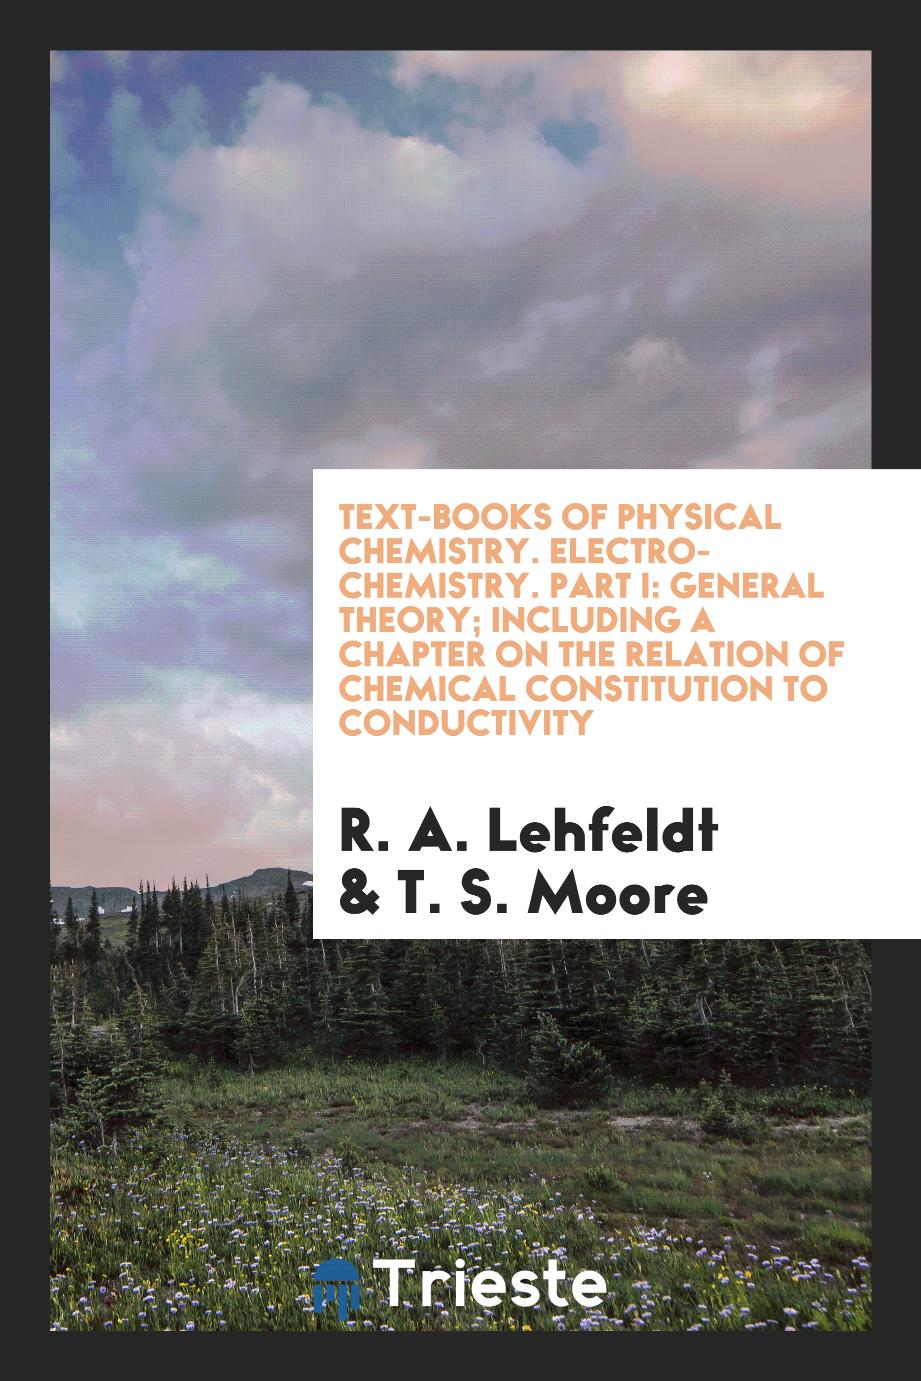 Text-Books of Physical Chemistry. Electro-Chemistry. Part I: General Theory; Including a Chapter on the Relation of Chemical Constitution to Conductivity